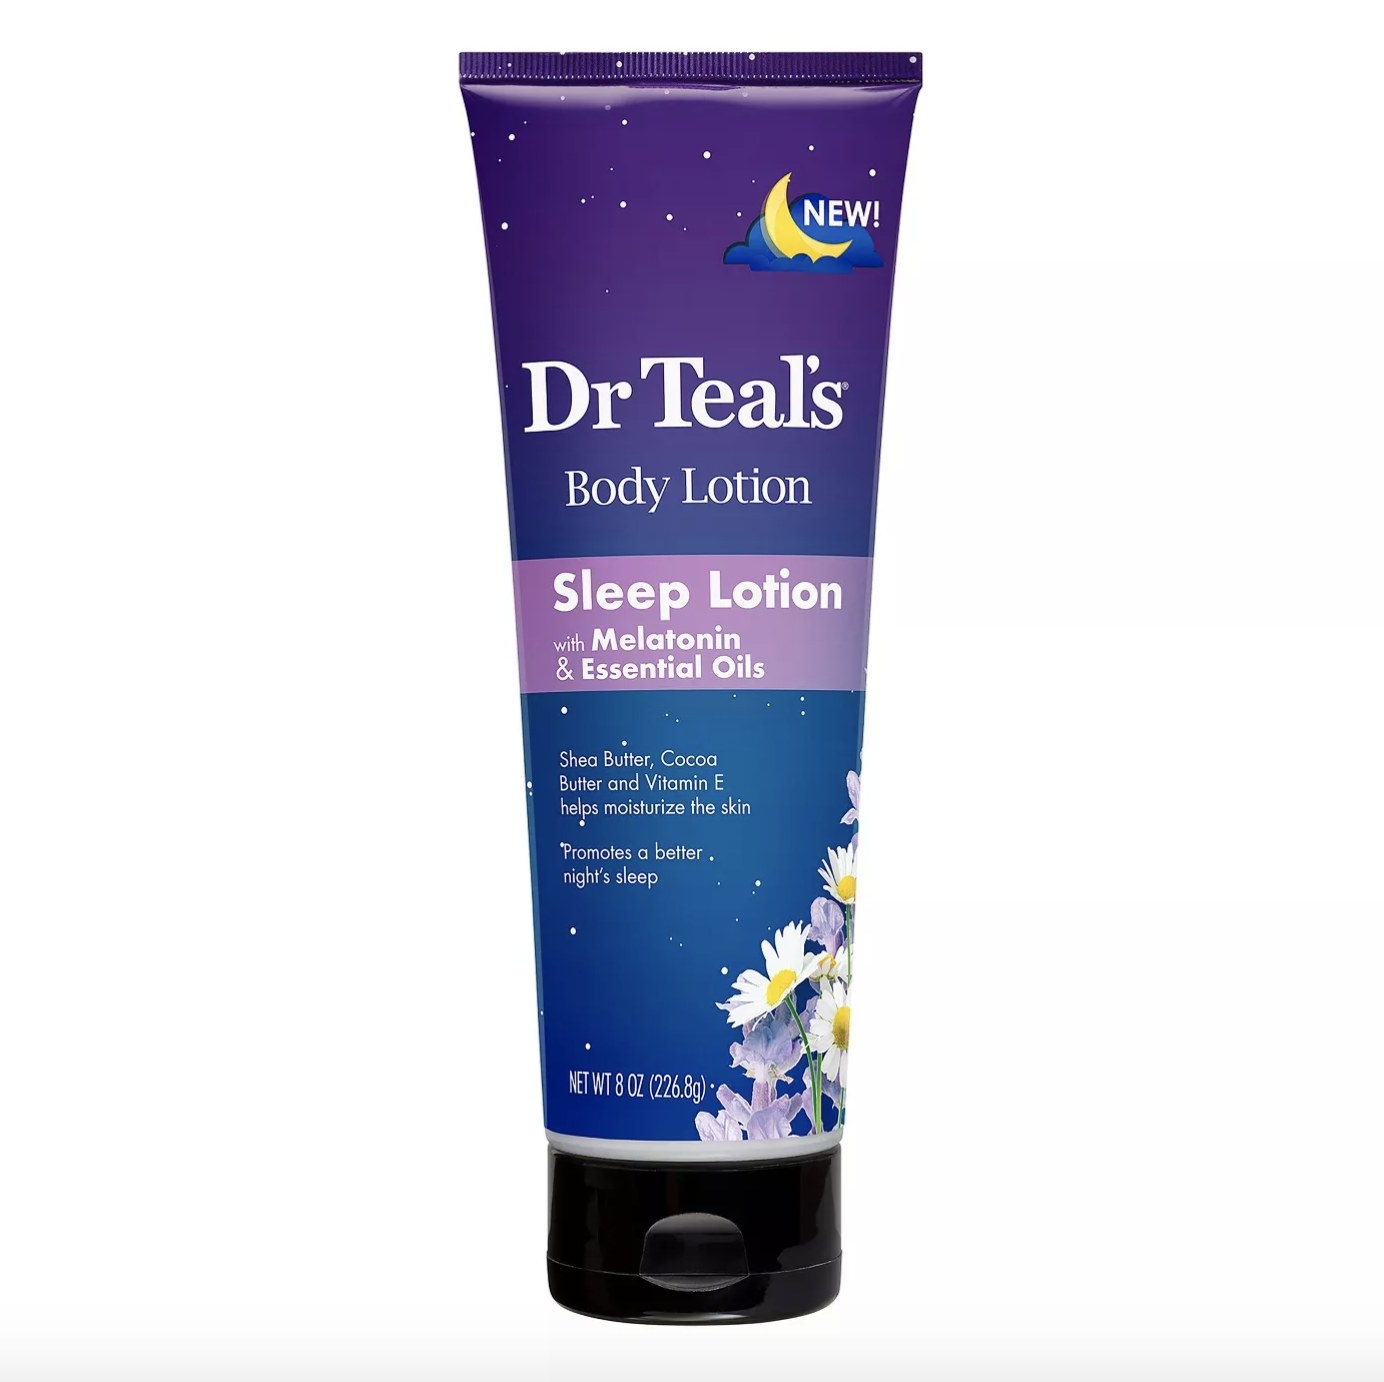 The purple to blue ombre bottle with stars and flowers says &quot;Dr Teal&#x27;s Body Lotion&quot; and says &quot;Sleep Lotion with Melatonin &amp;amp; Essential Oils&quot; in a purple banner below